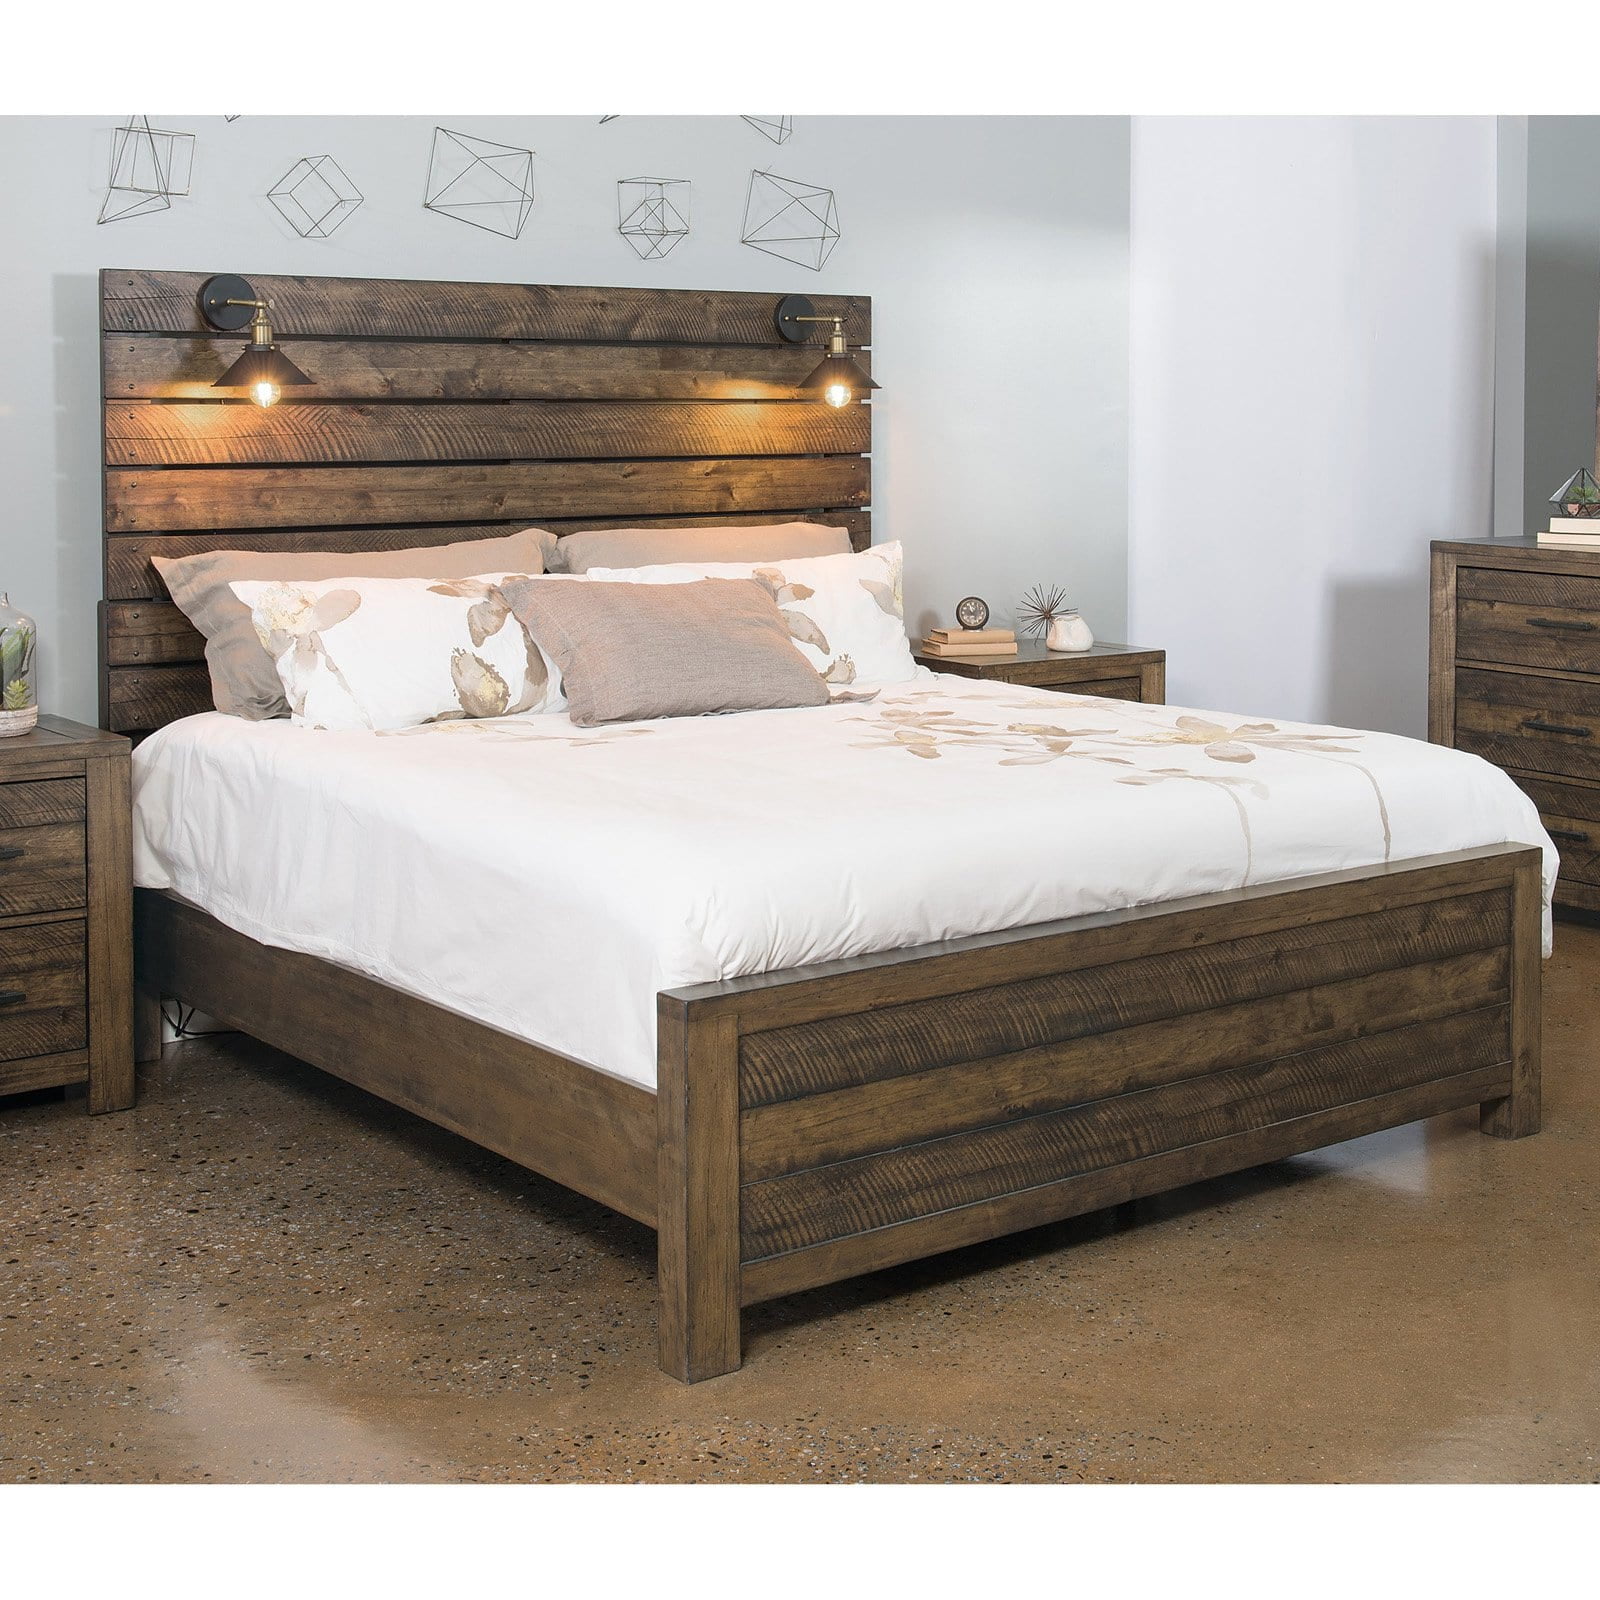 Roundhill Furniture Dajono Panel Bed, King Size Headboard With Built In Reading Lights